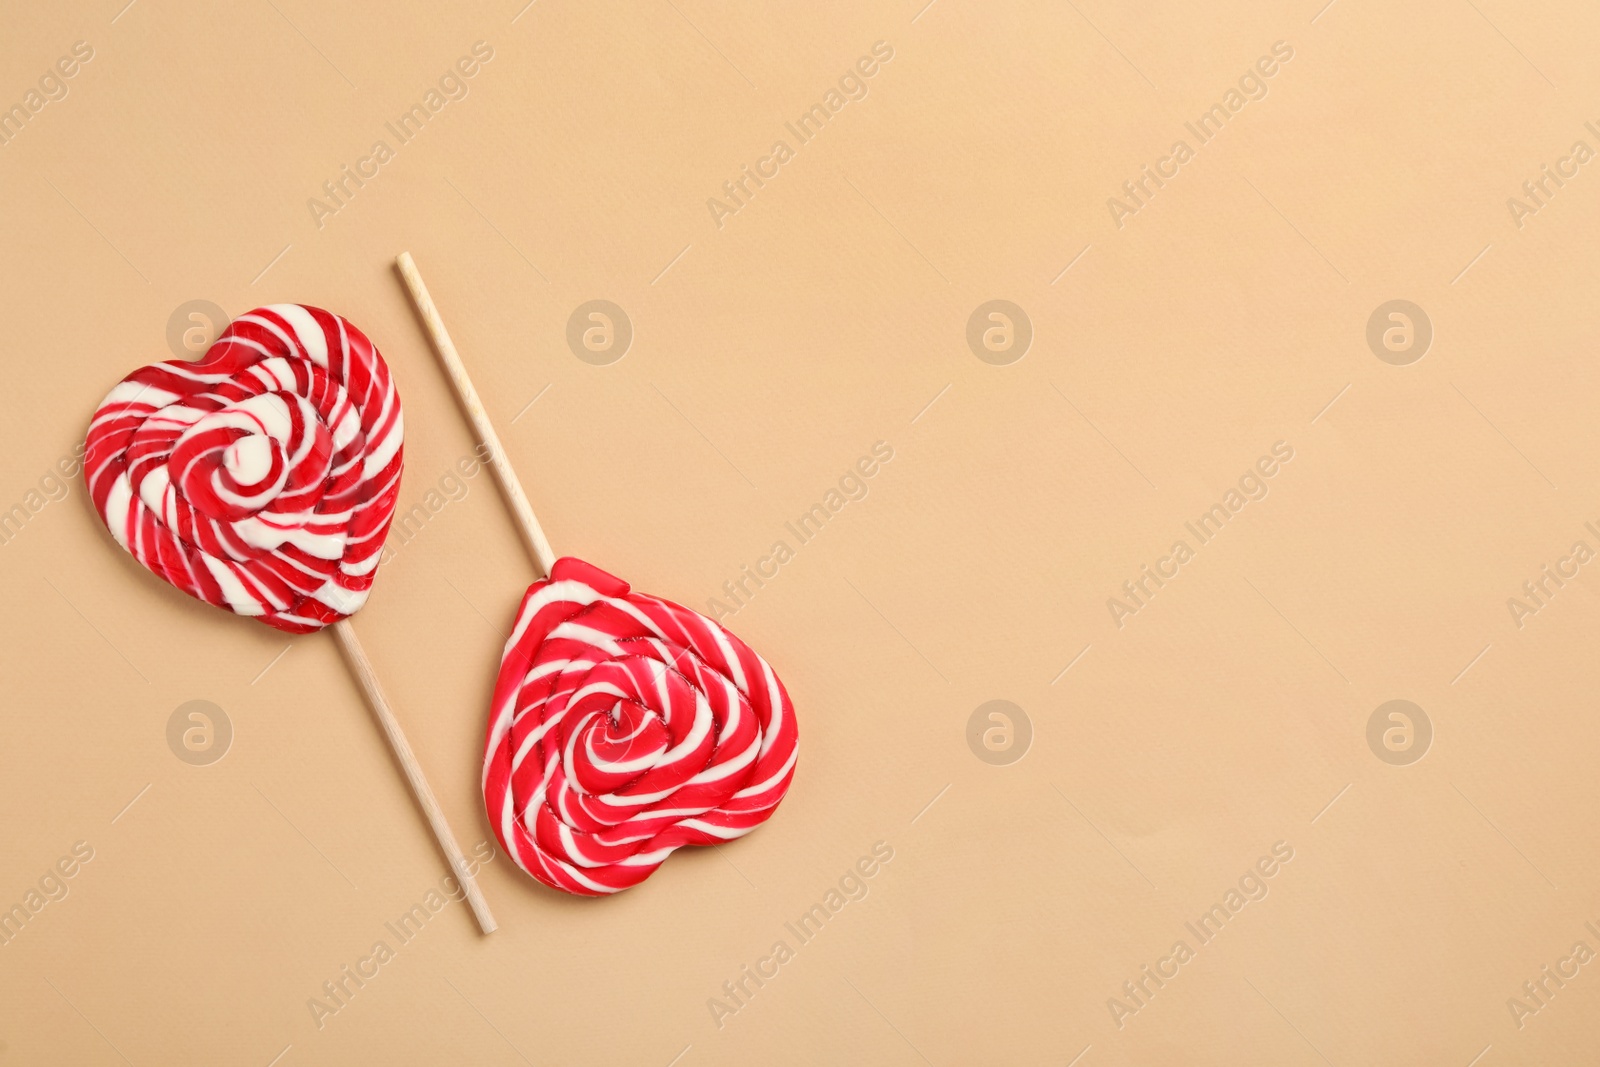 Photo of Sweet heart shaped lollipops on beige background, flat lay with space for text. Valentine's day celebration